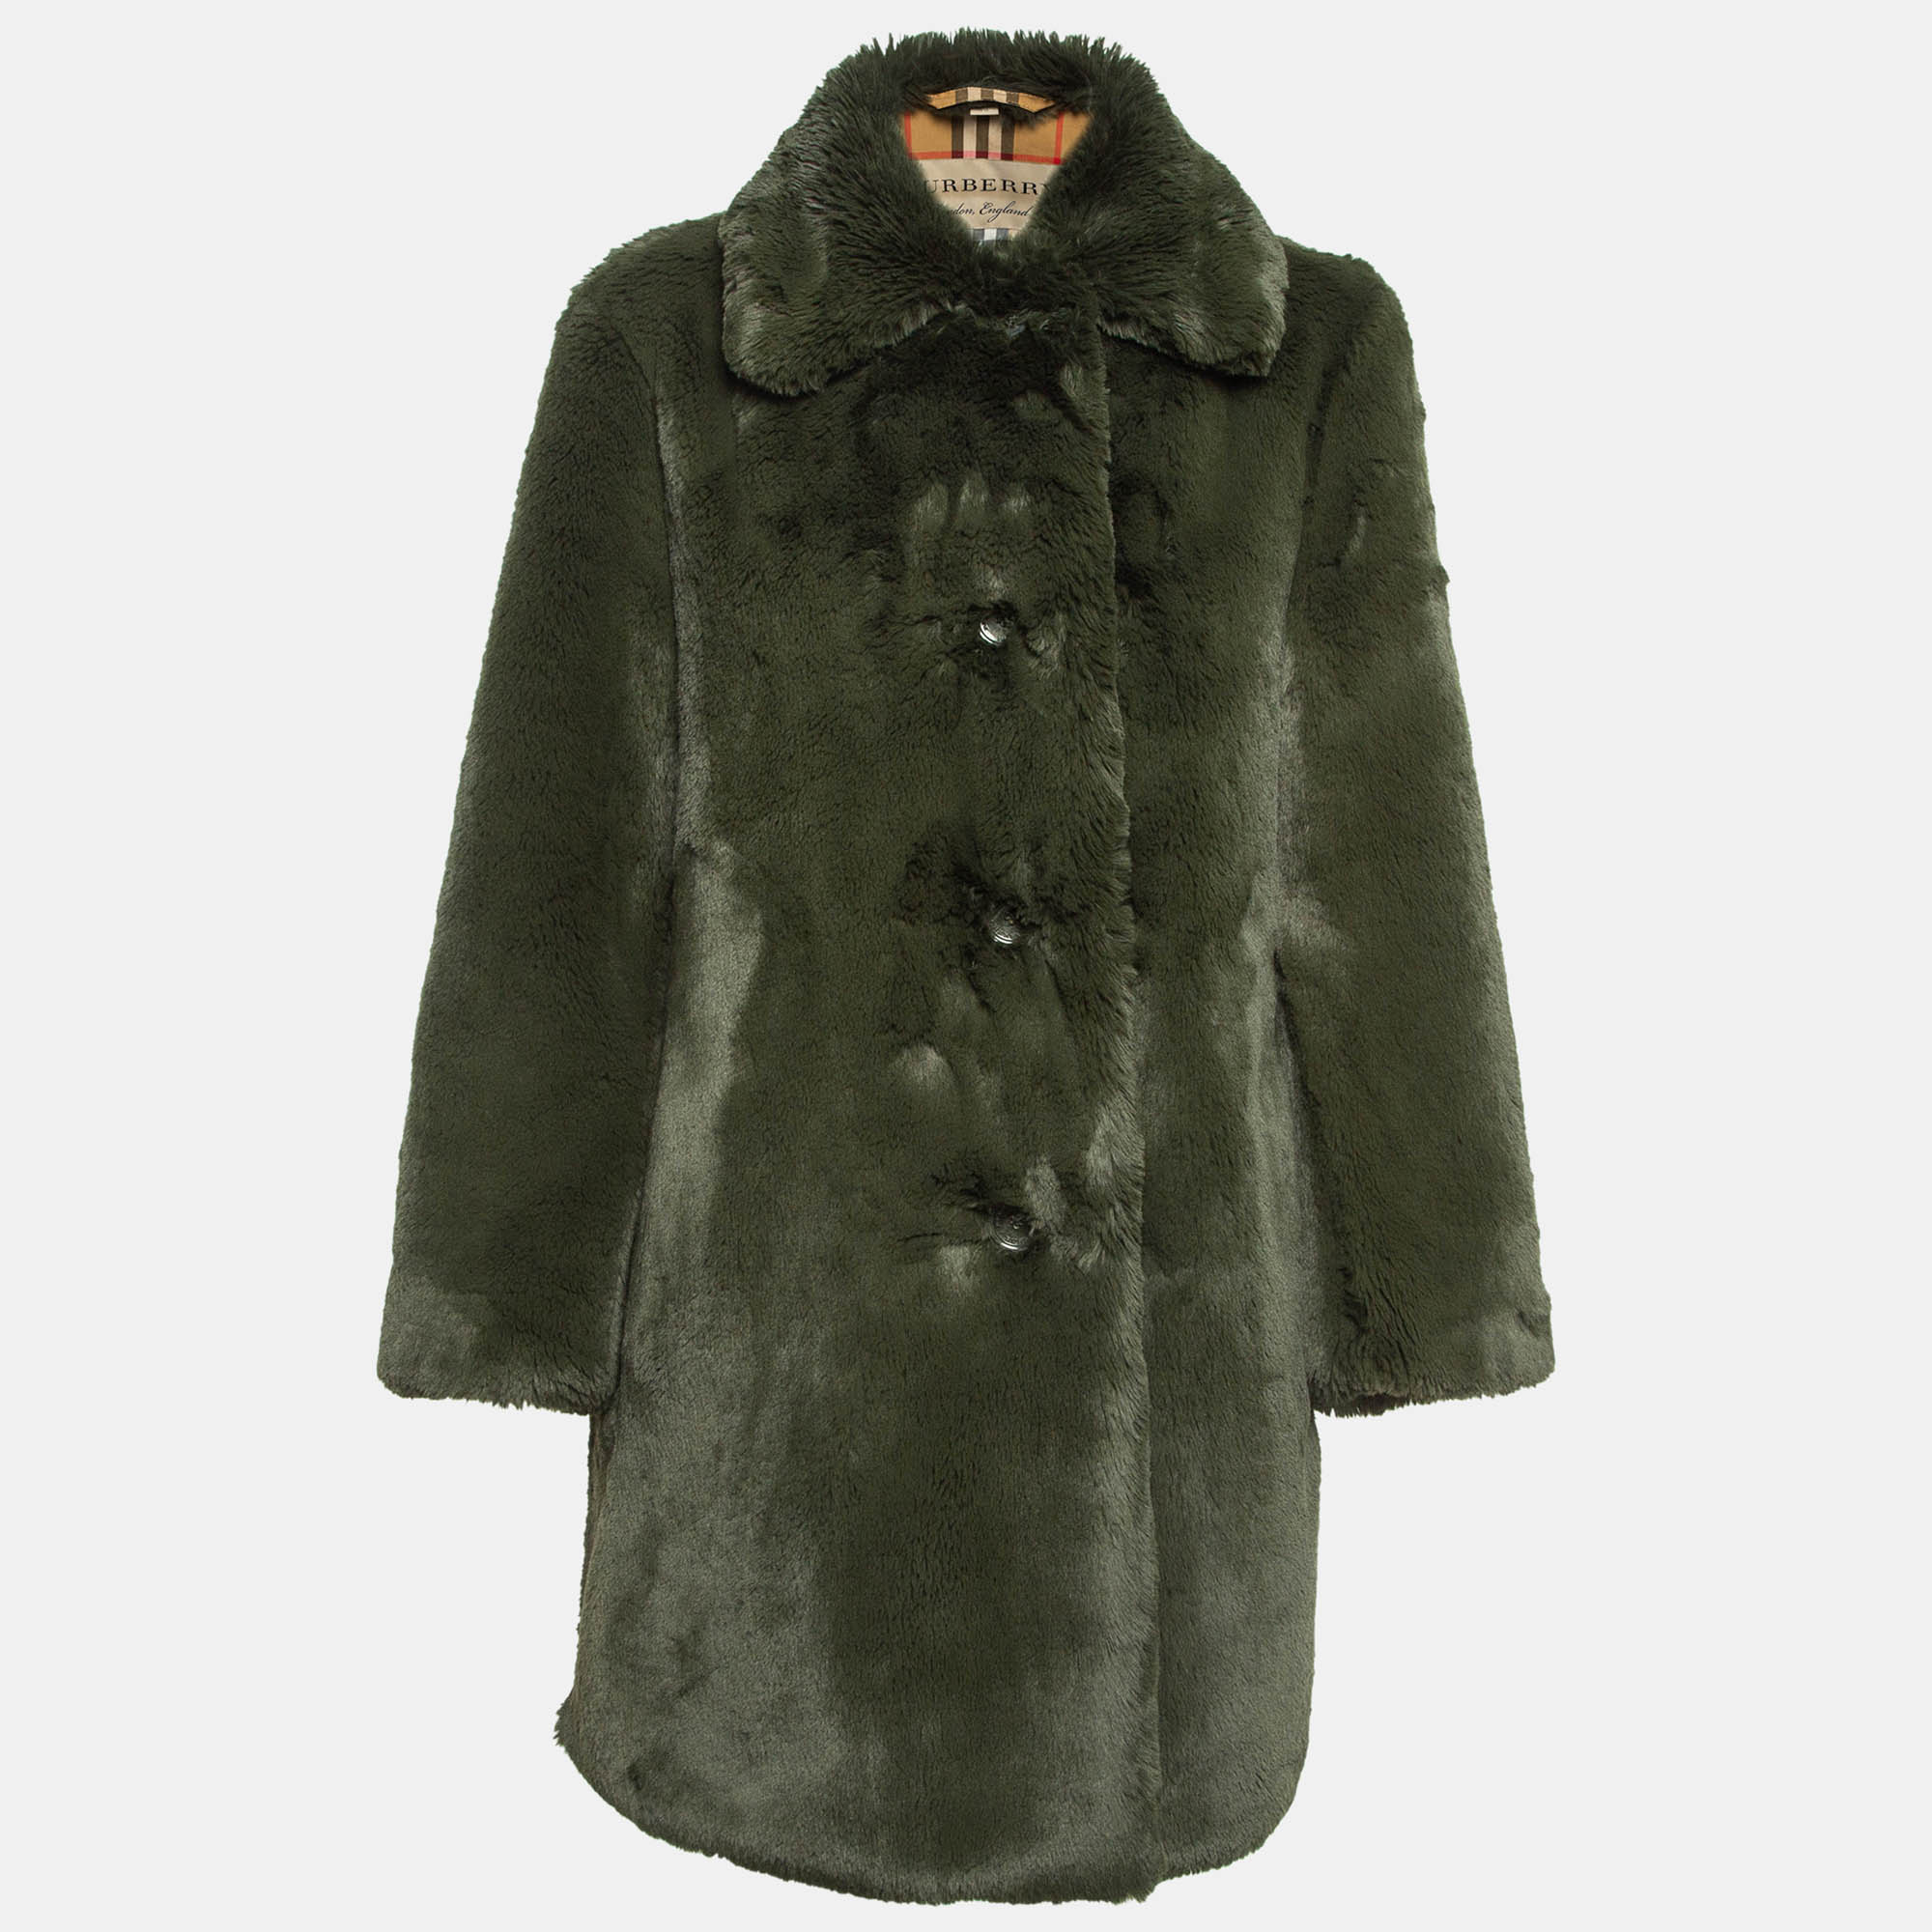 Burberry green faux fur single breasted coat s